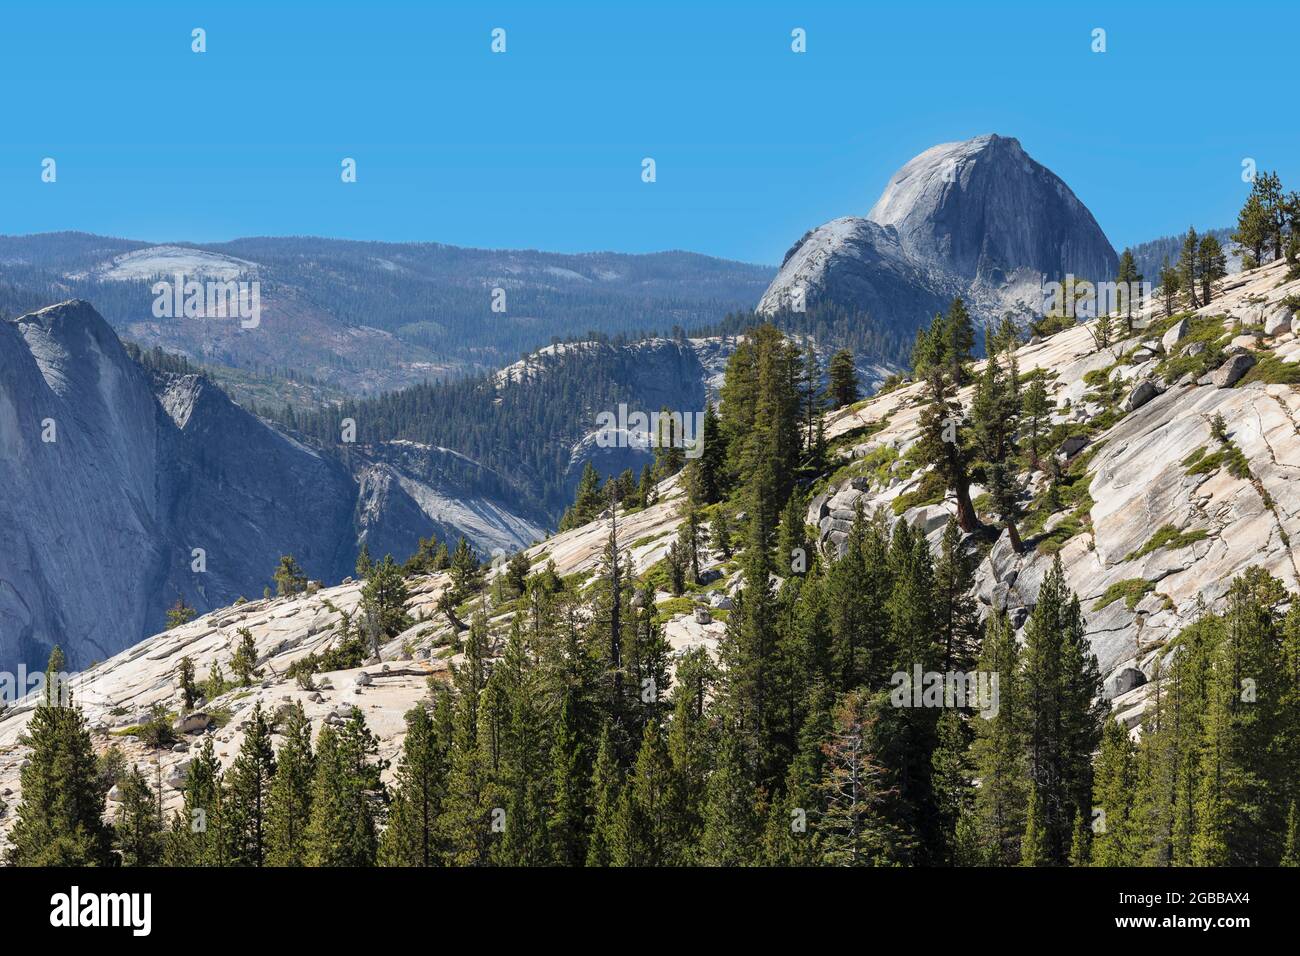 View from Olmsted Point to Half Dome, Yosemite National Park, UNESCO World Heritage Site, California, United States of America, North America Stock Photo